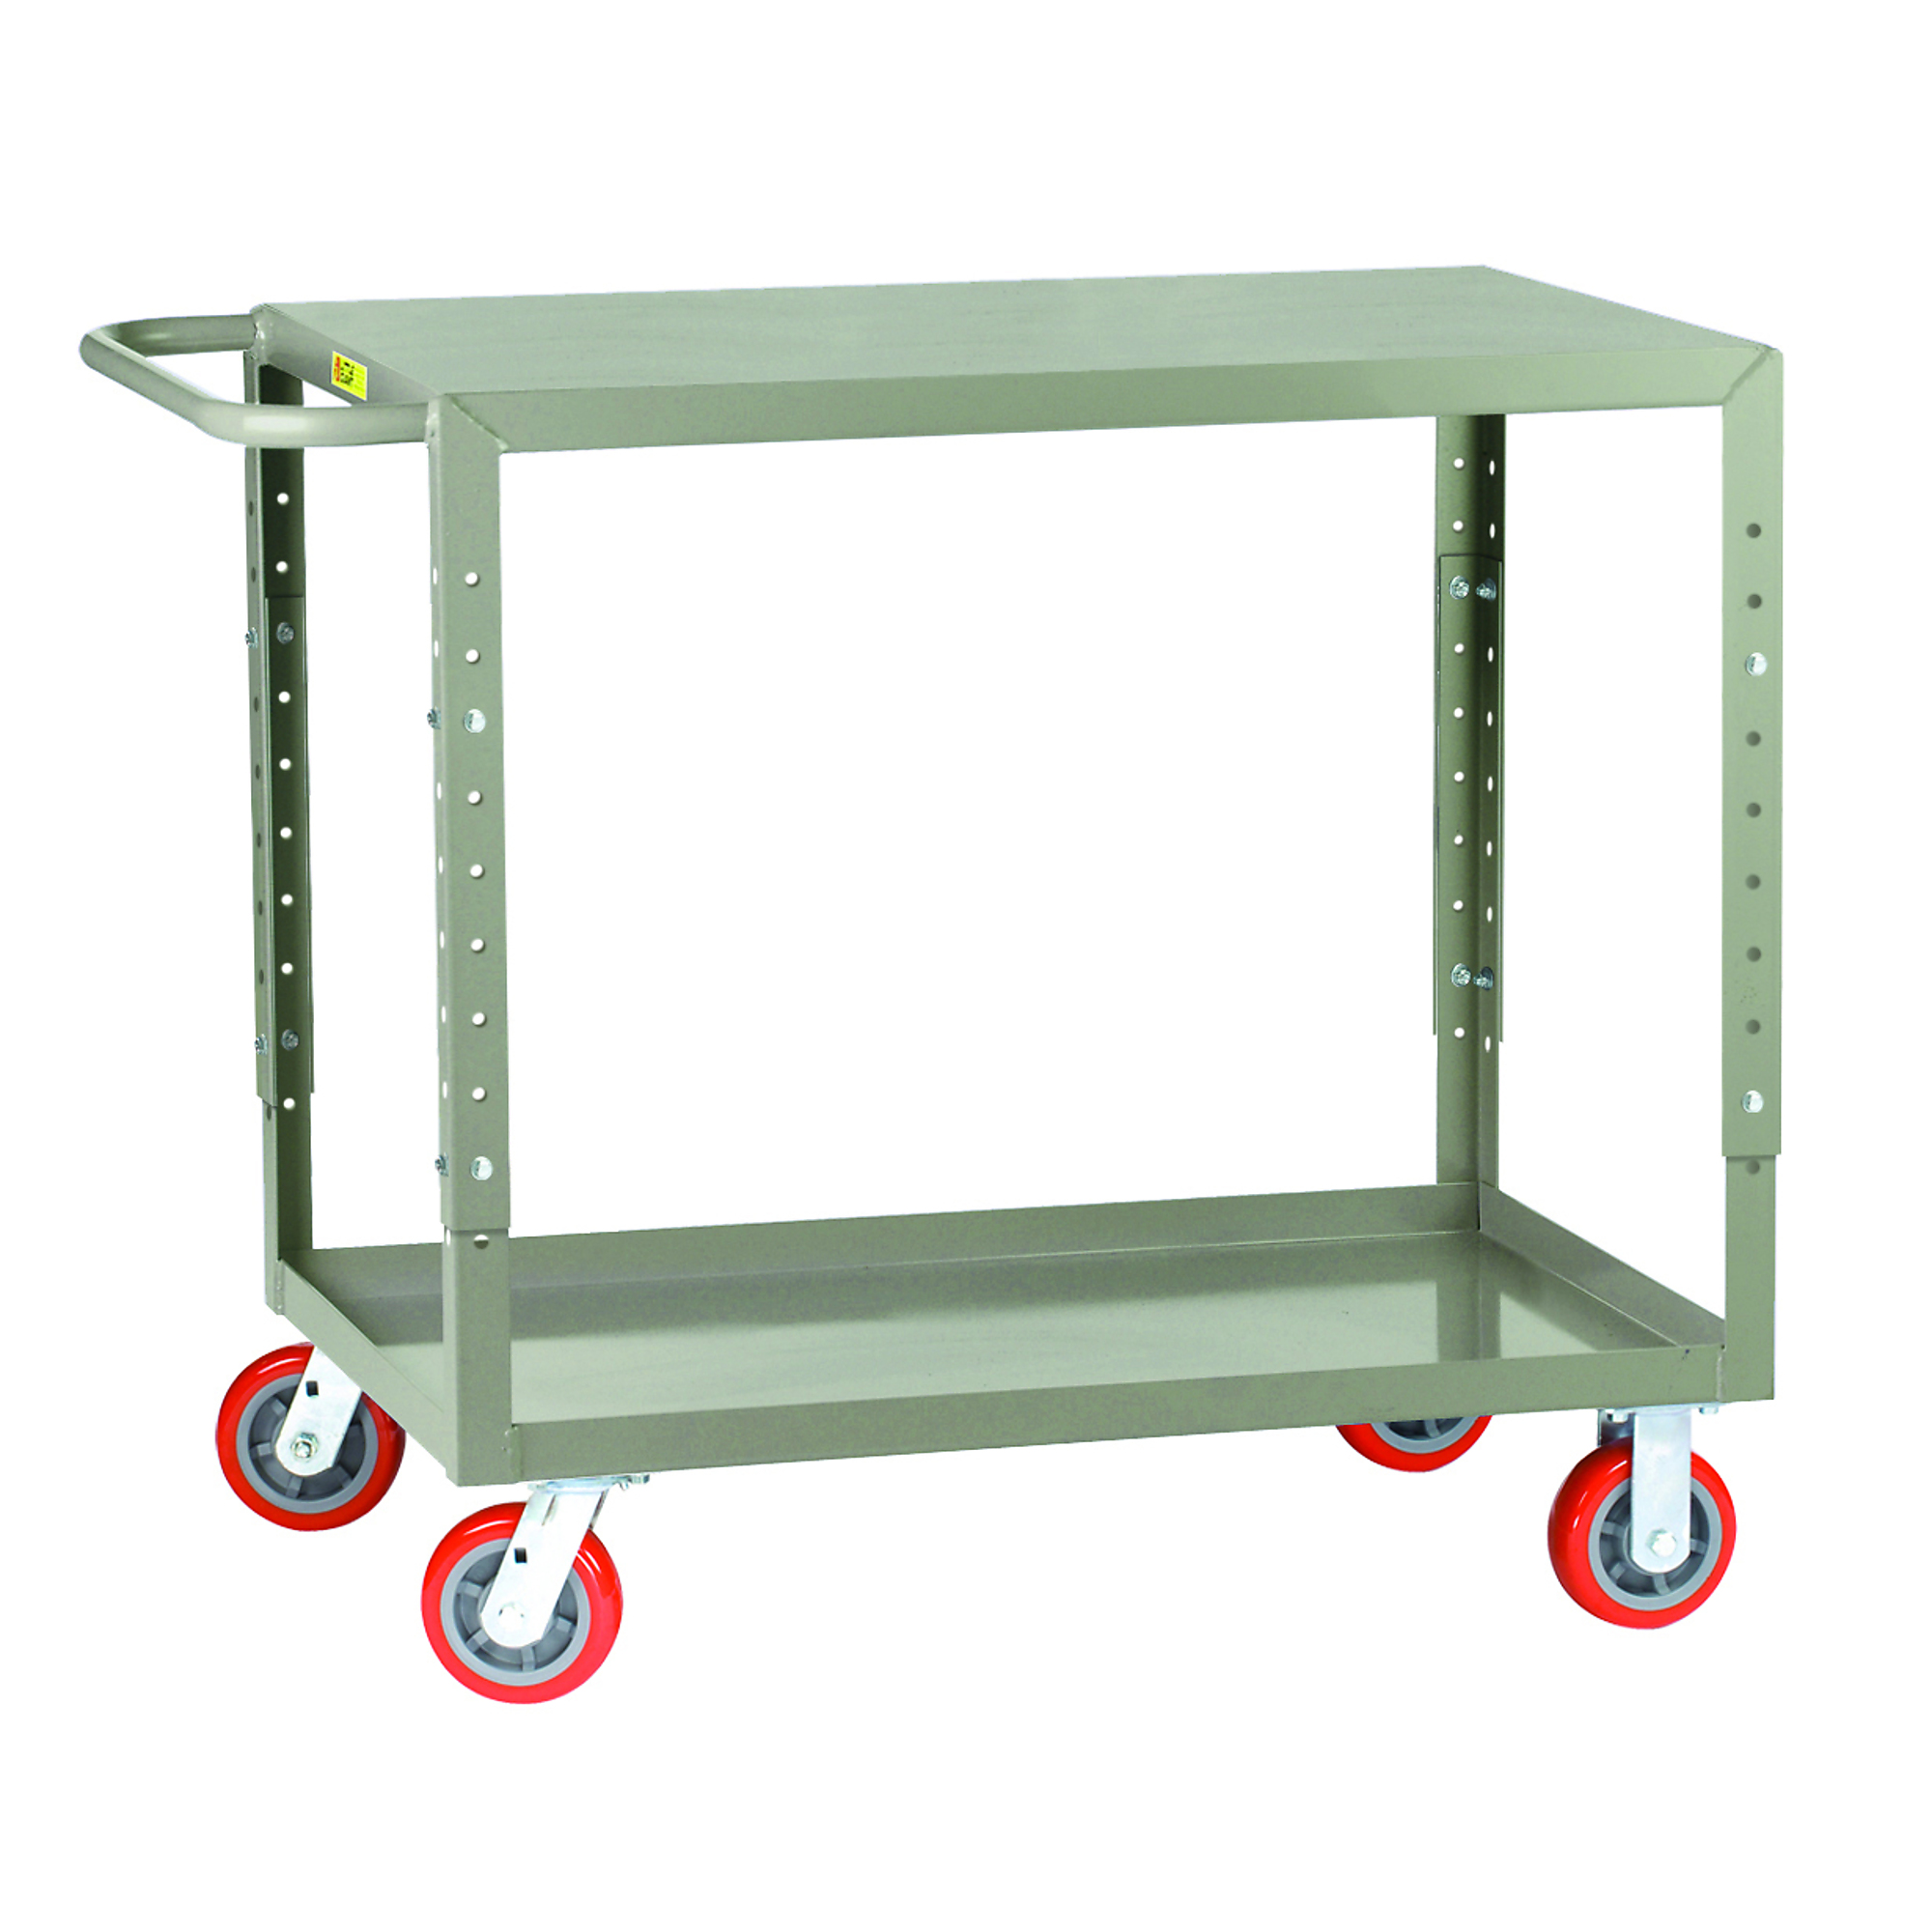 Little Giant, Adj. Height Welded Service Cart, 30x48, 1200 lbs, Total Capacity 1200 lb, Shelves (qty.) 2, Material Carbon Steel, Model LG-3048-5PYBKAH